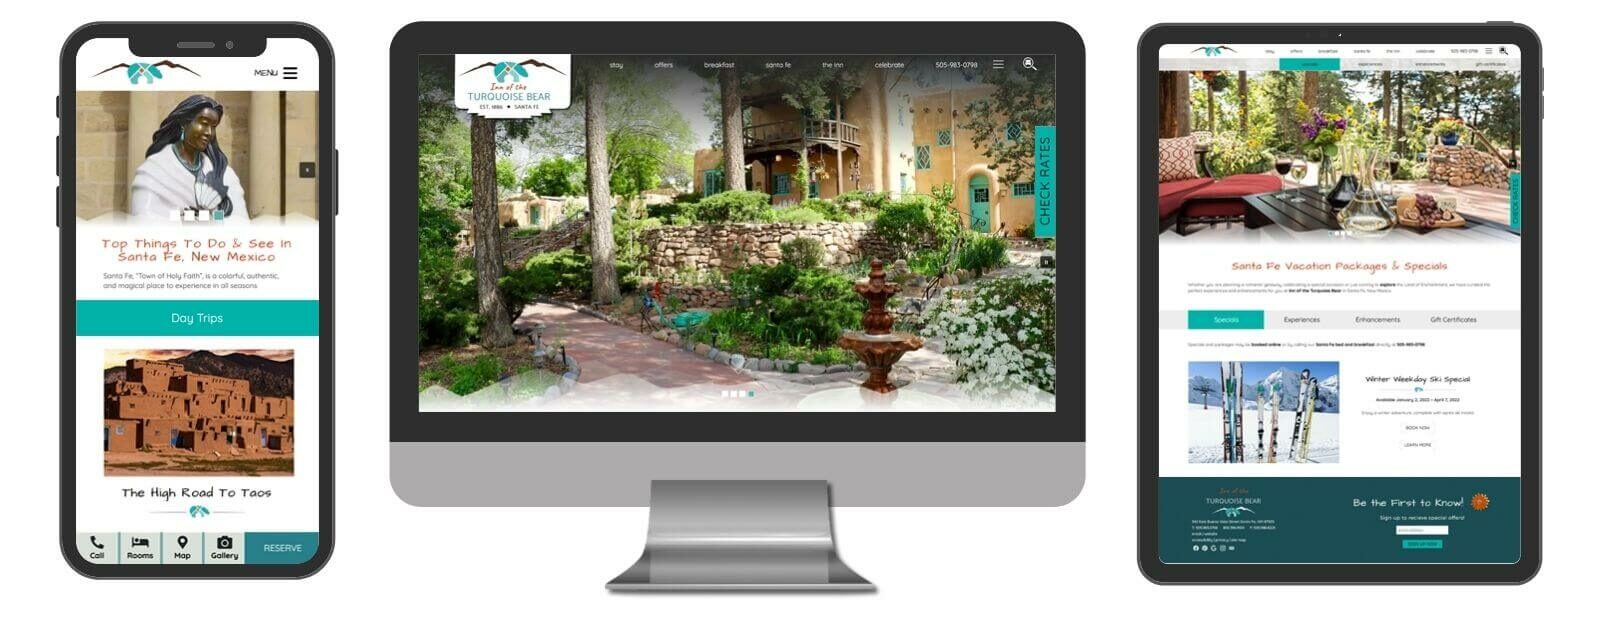 Inn of the Turquoise Bear - Premium website design displayed in 3 sizes - mobile, template and desktop